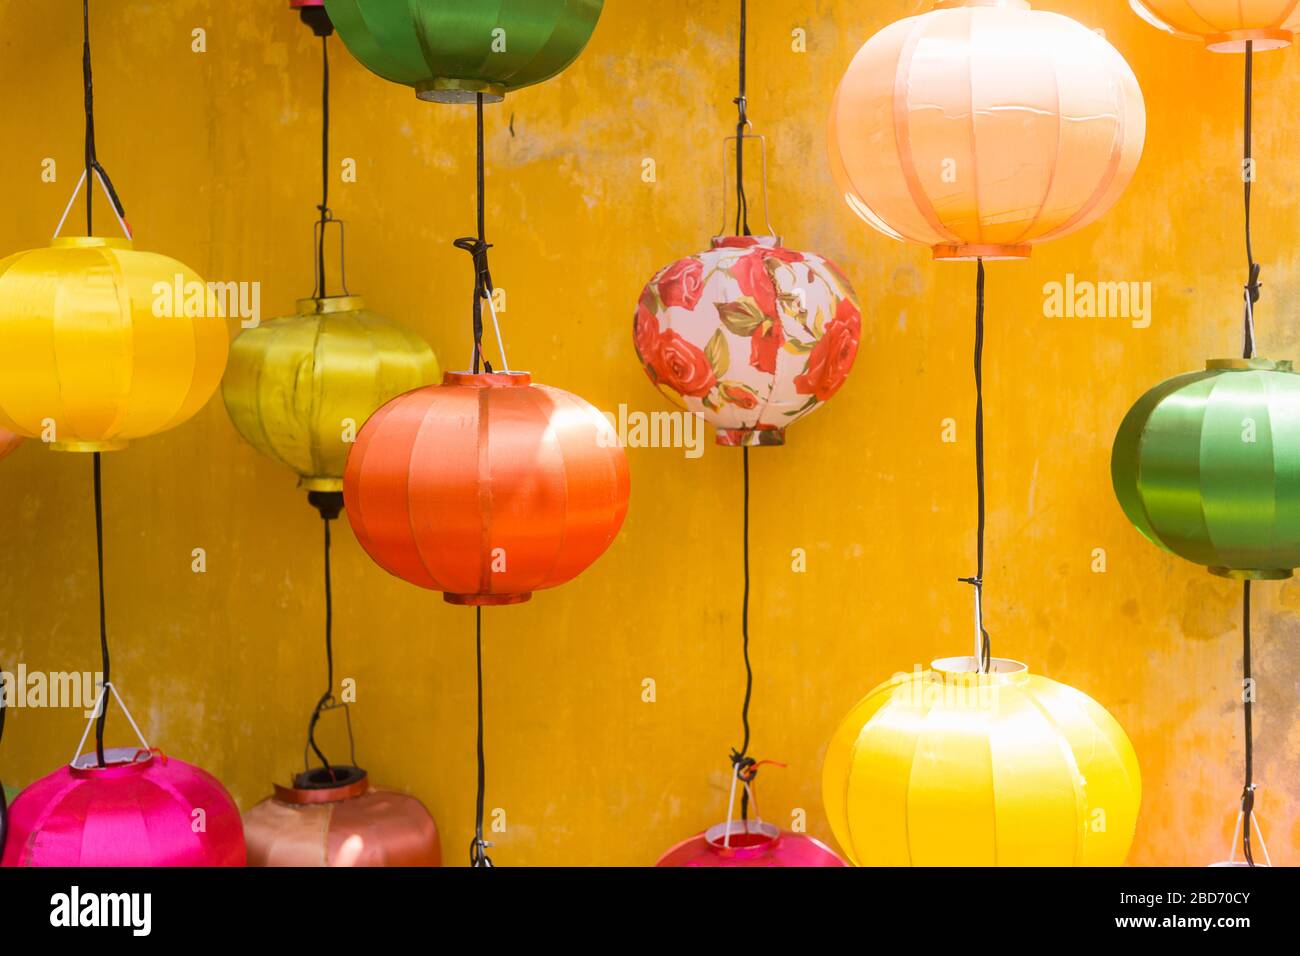 Hoi An Vietnam - Colourful handcrafted lanterns in the ancient town of Hoi An, Vietnam, Southeast Asia. Stock Photo